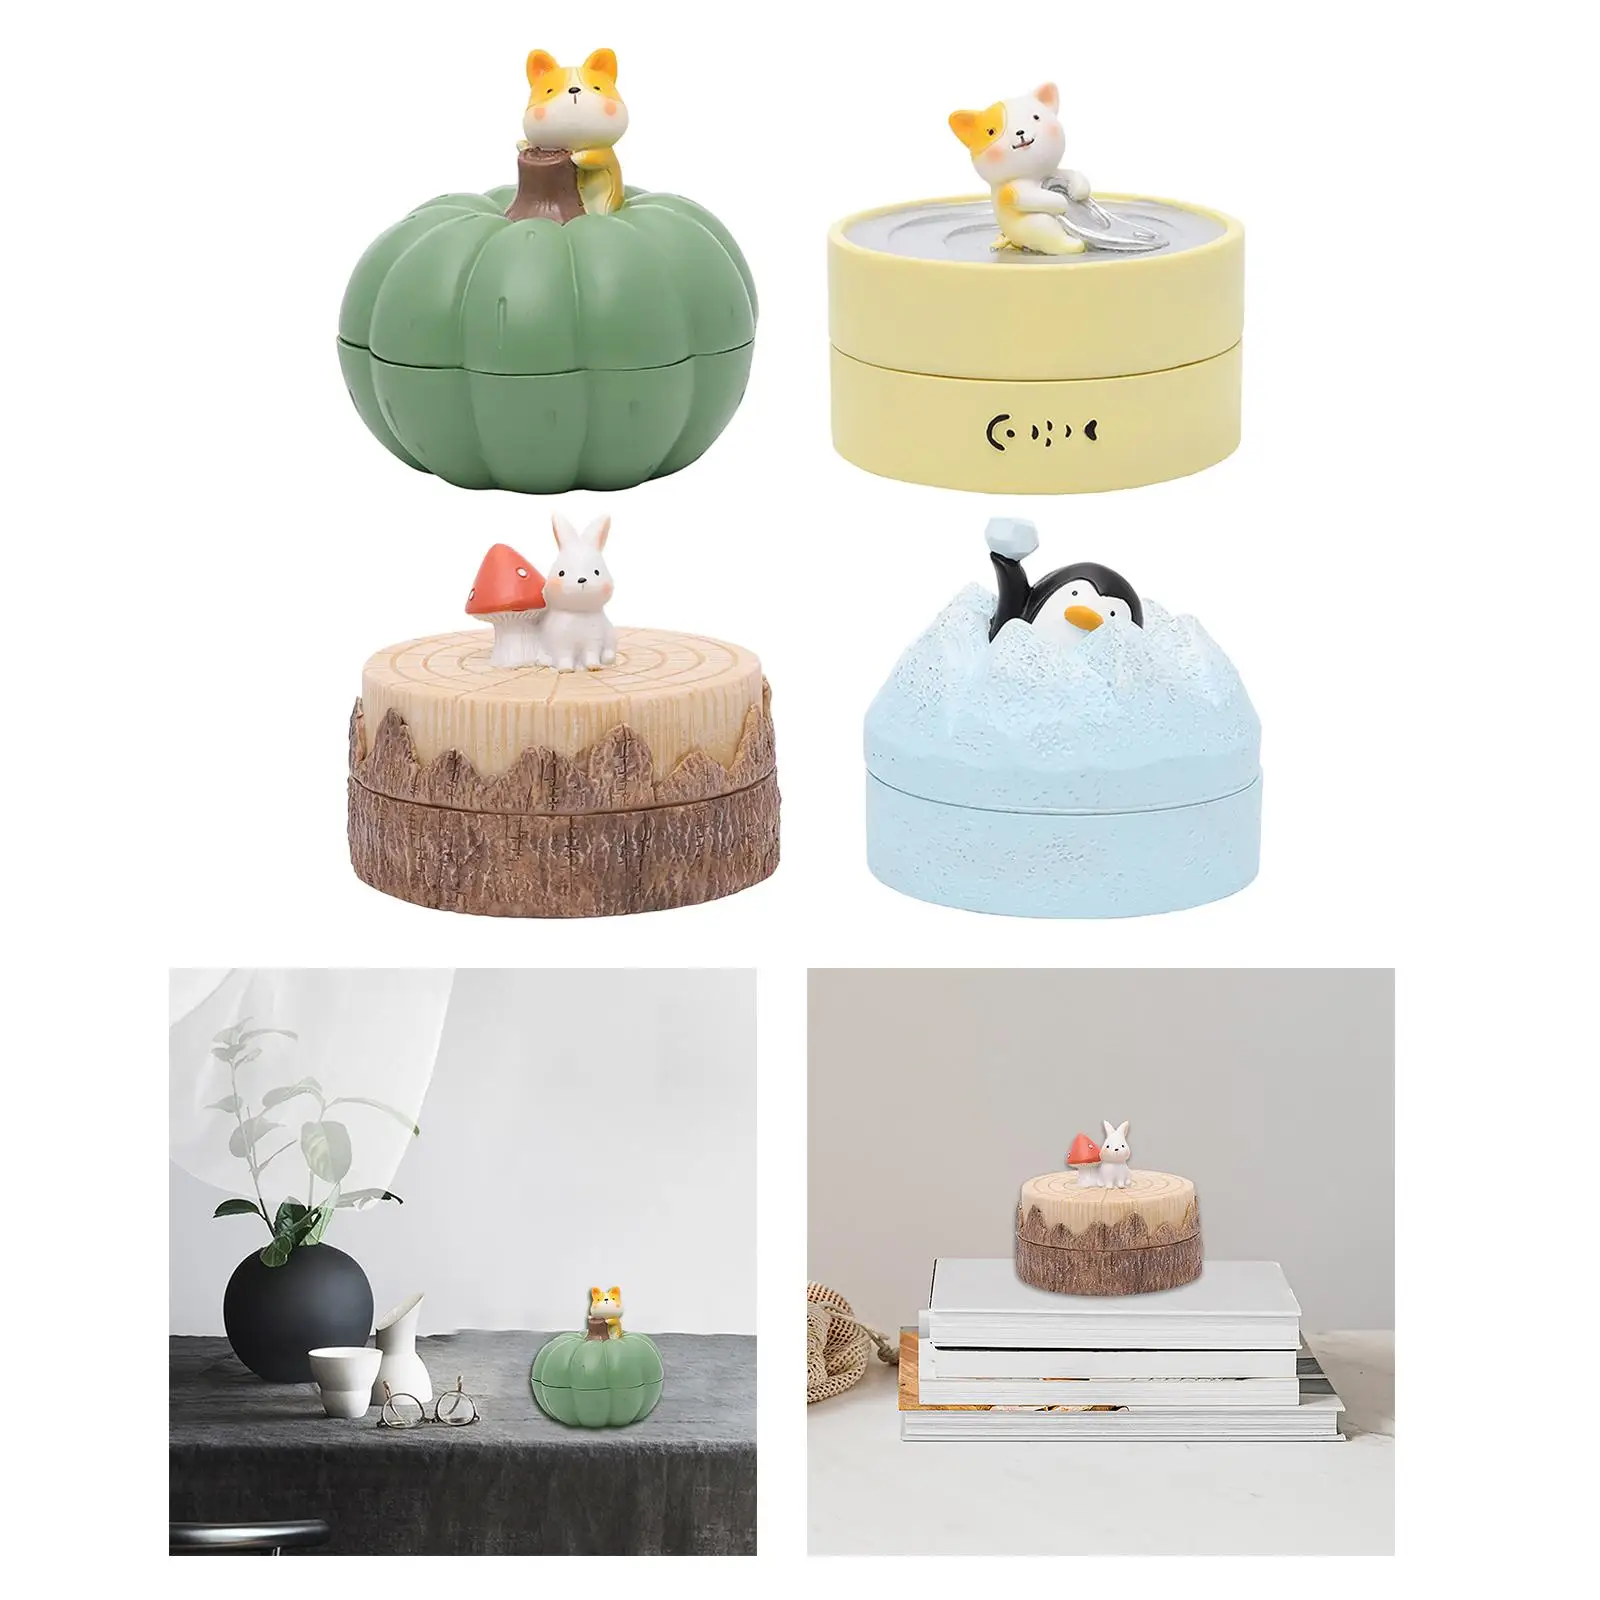 Cute Animal Ashtray Cigarettes Holder W/ Cover Jewelry Box 3 Slots Figurine Ash Tray for Restaurant Hotel Tabletop Home Ornament